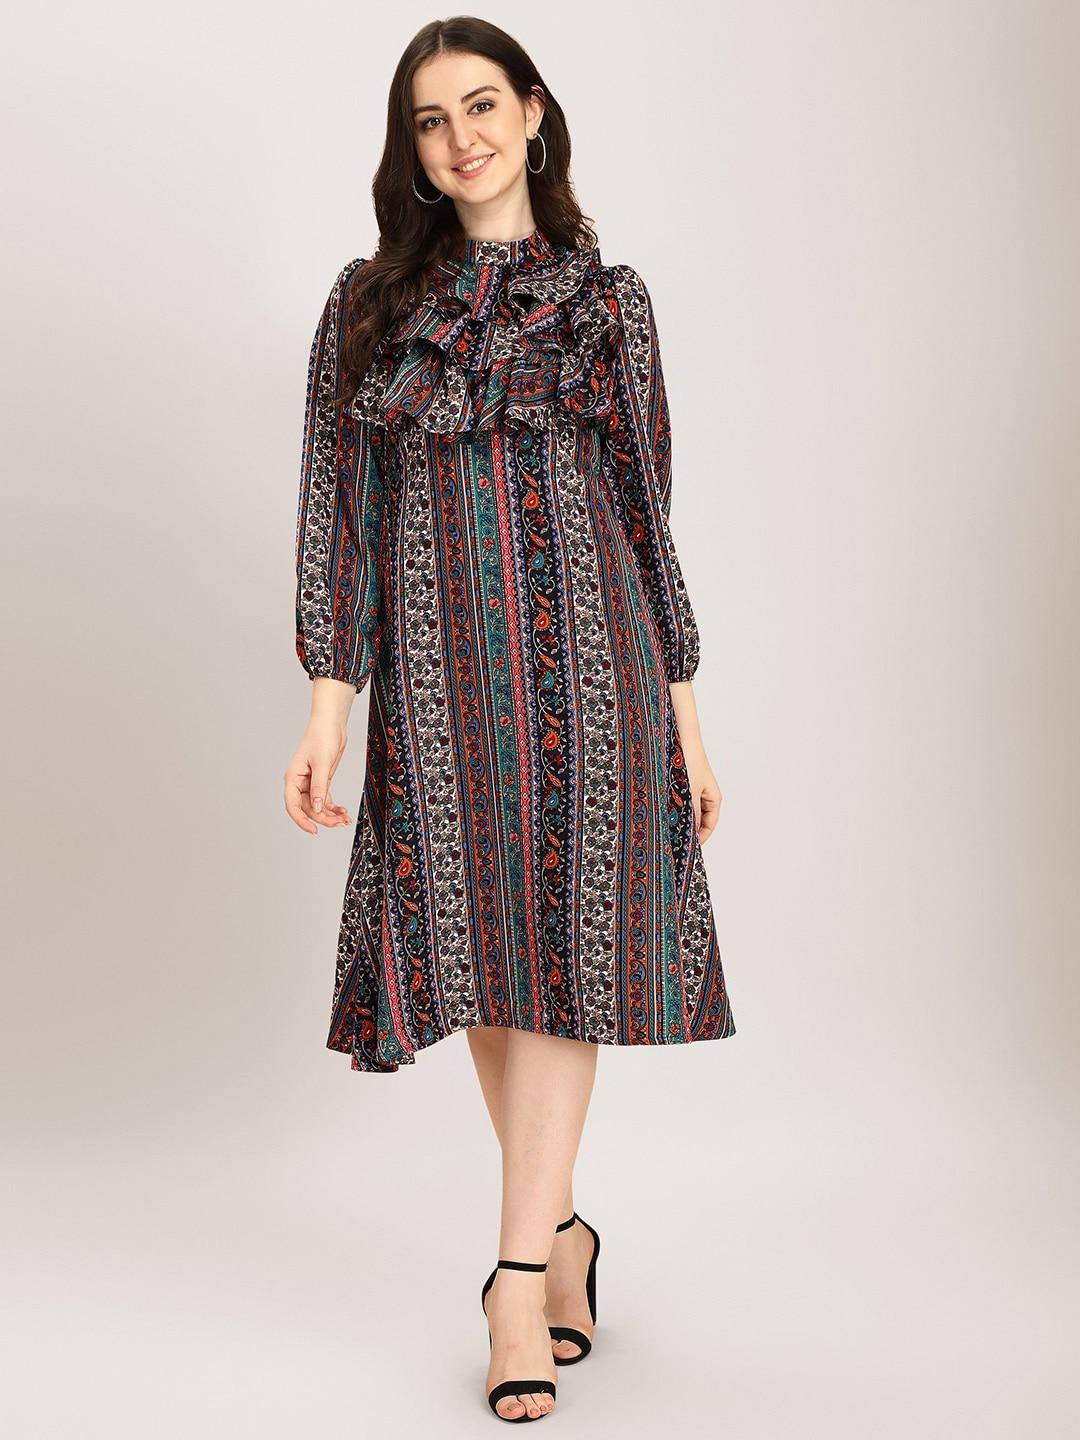 baesd-floral-printed-high-neck-puff-sleeves-ruffles-detail-a-line-dress